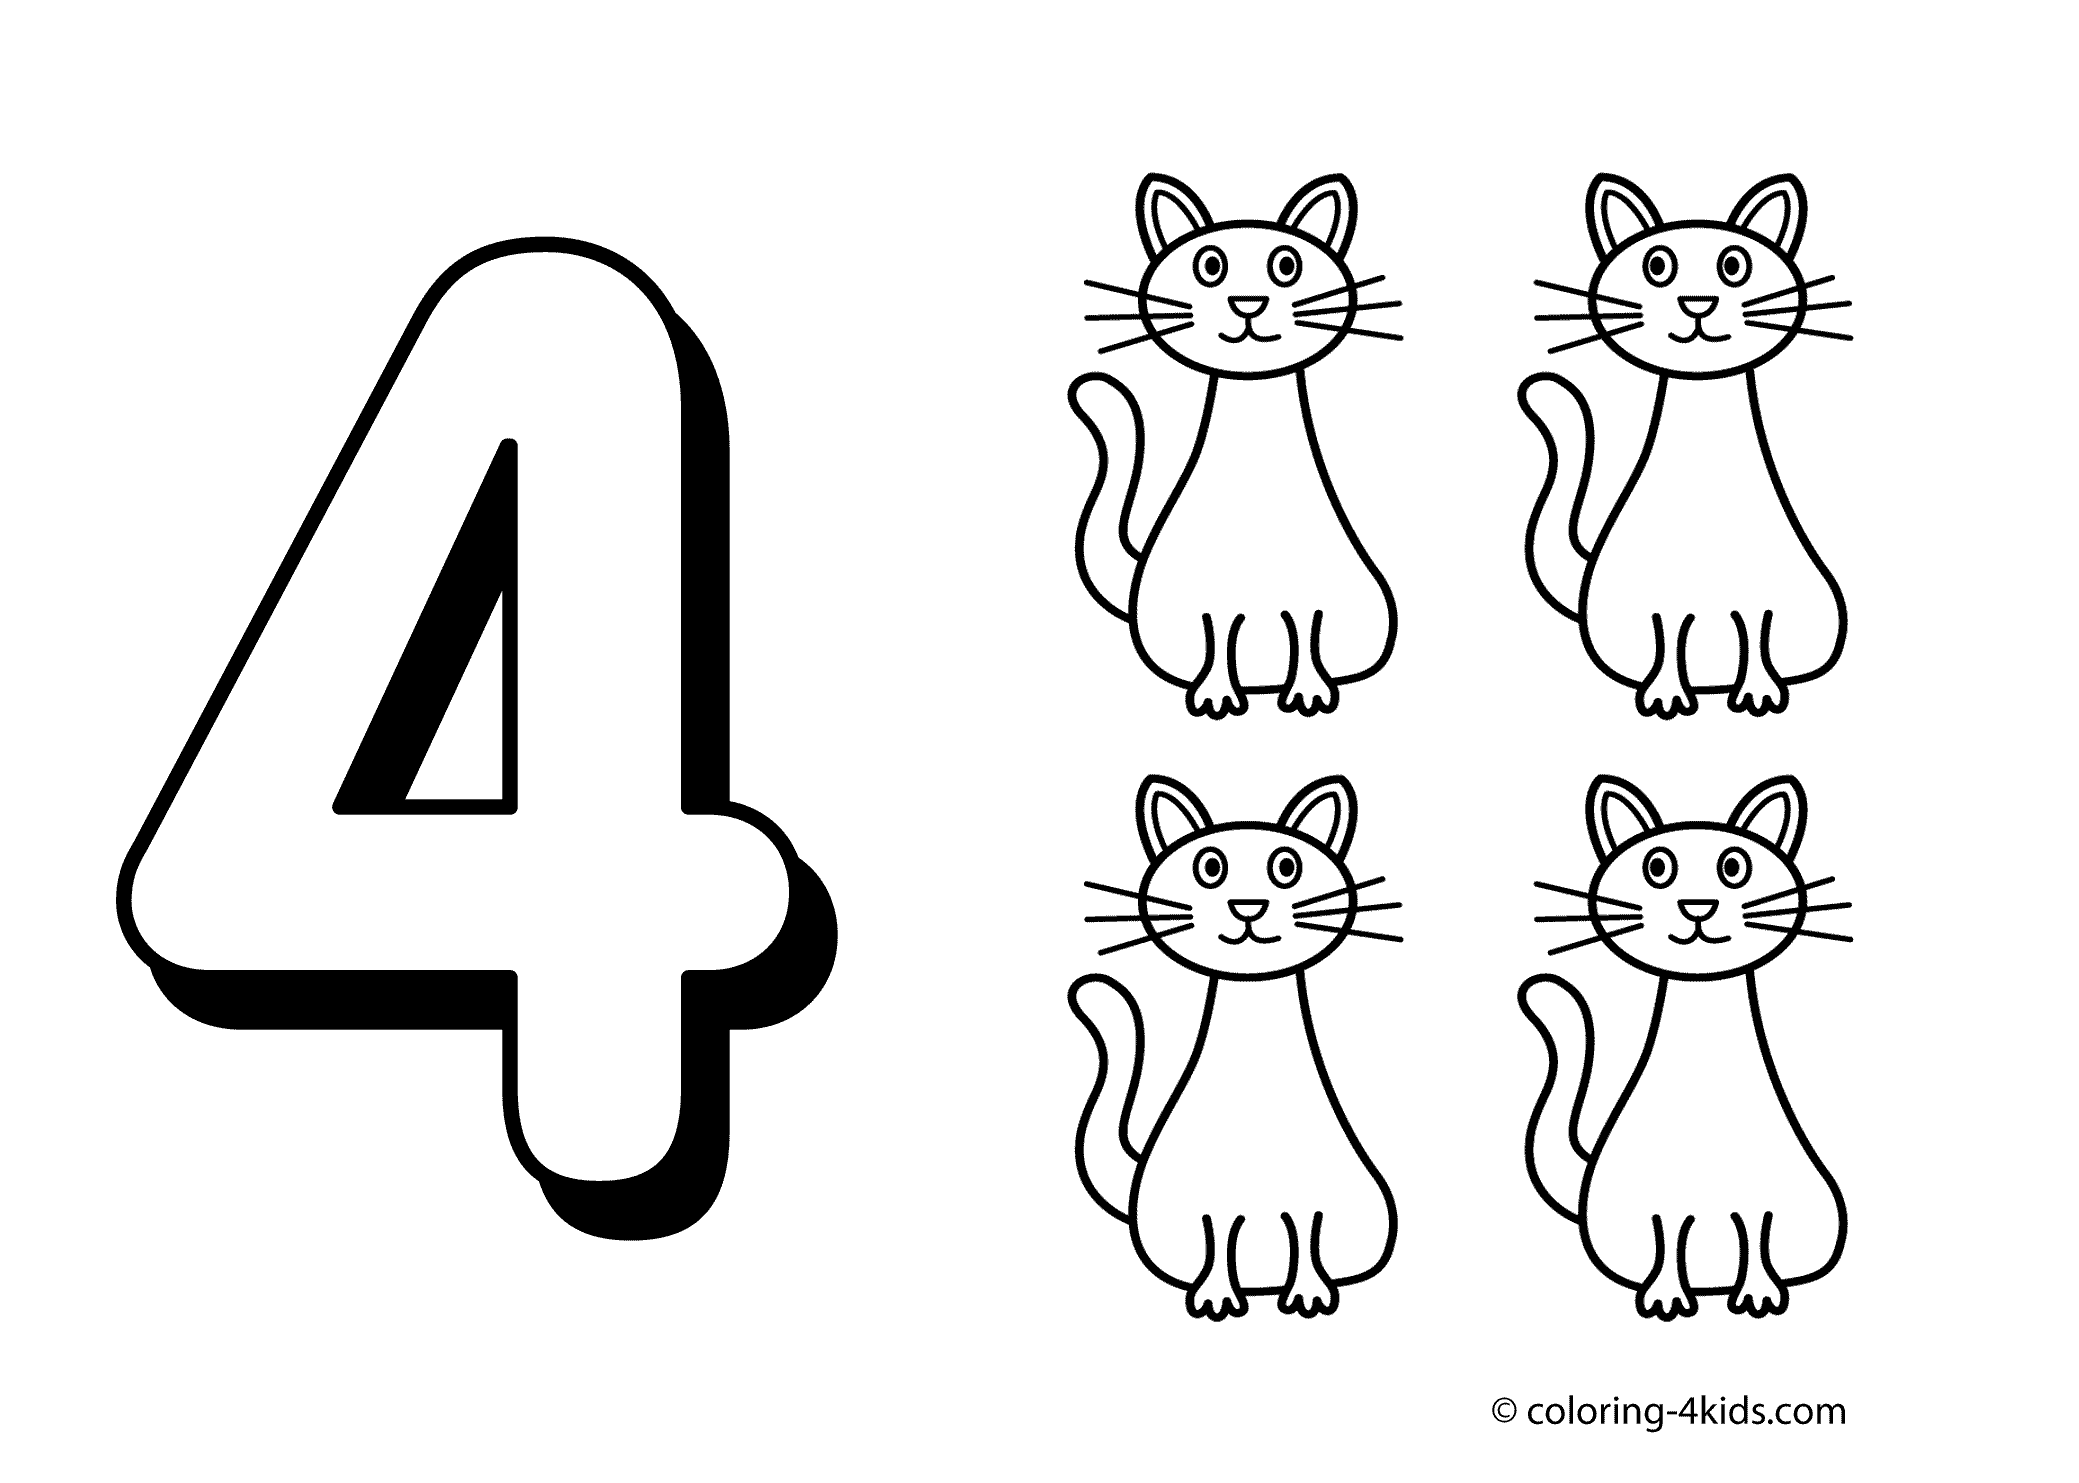 number-4-coloring-sheets-clipart-black-and-white-20-free-cliparts-download-images-on